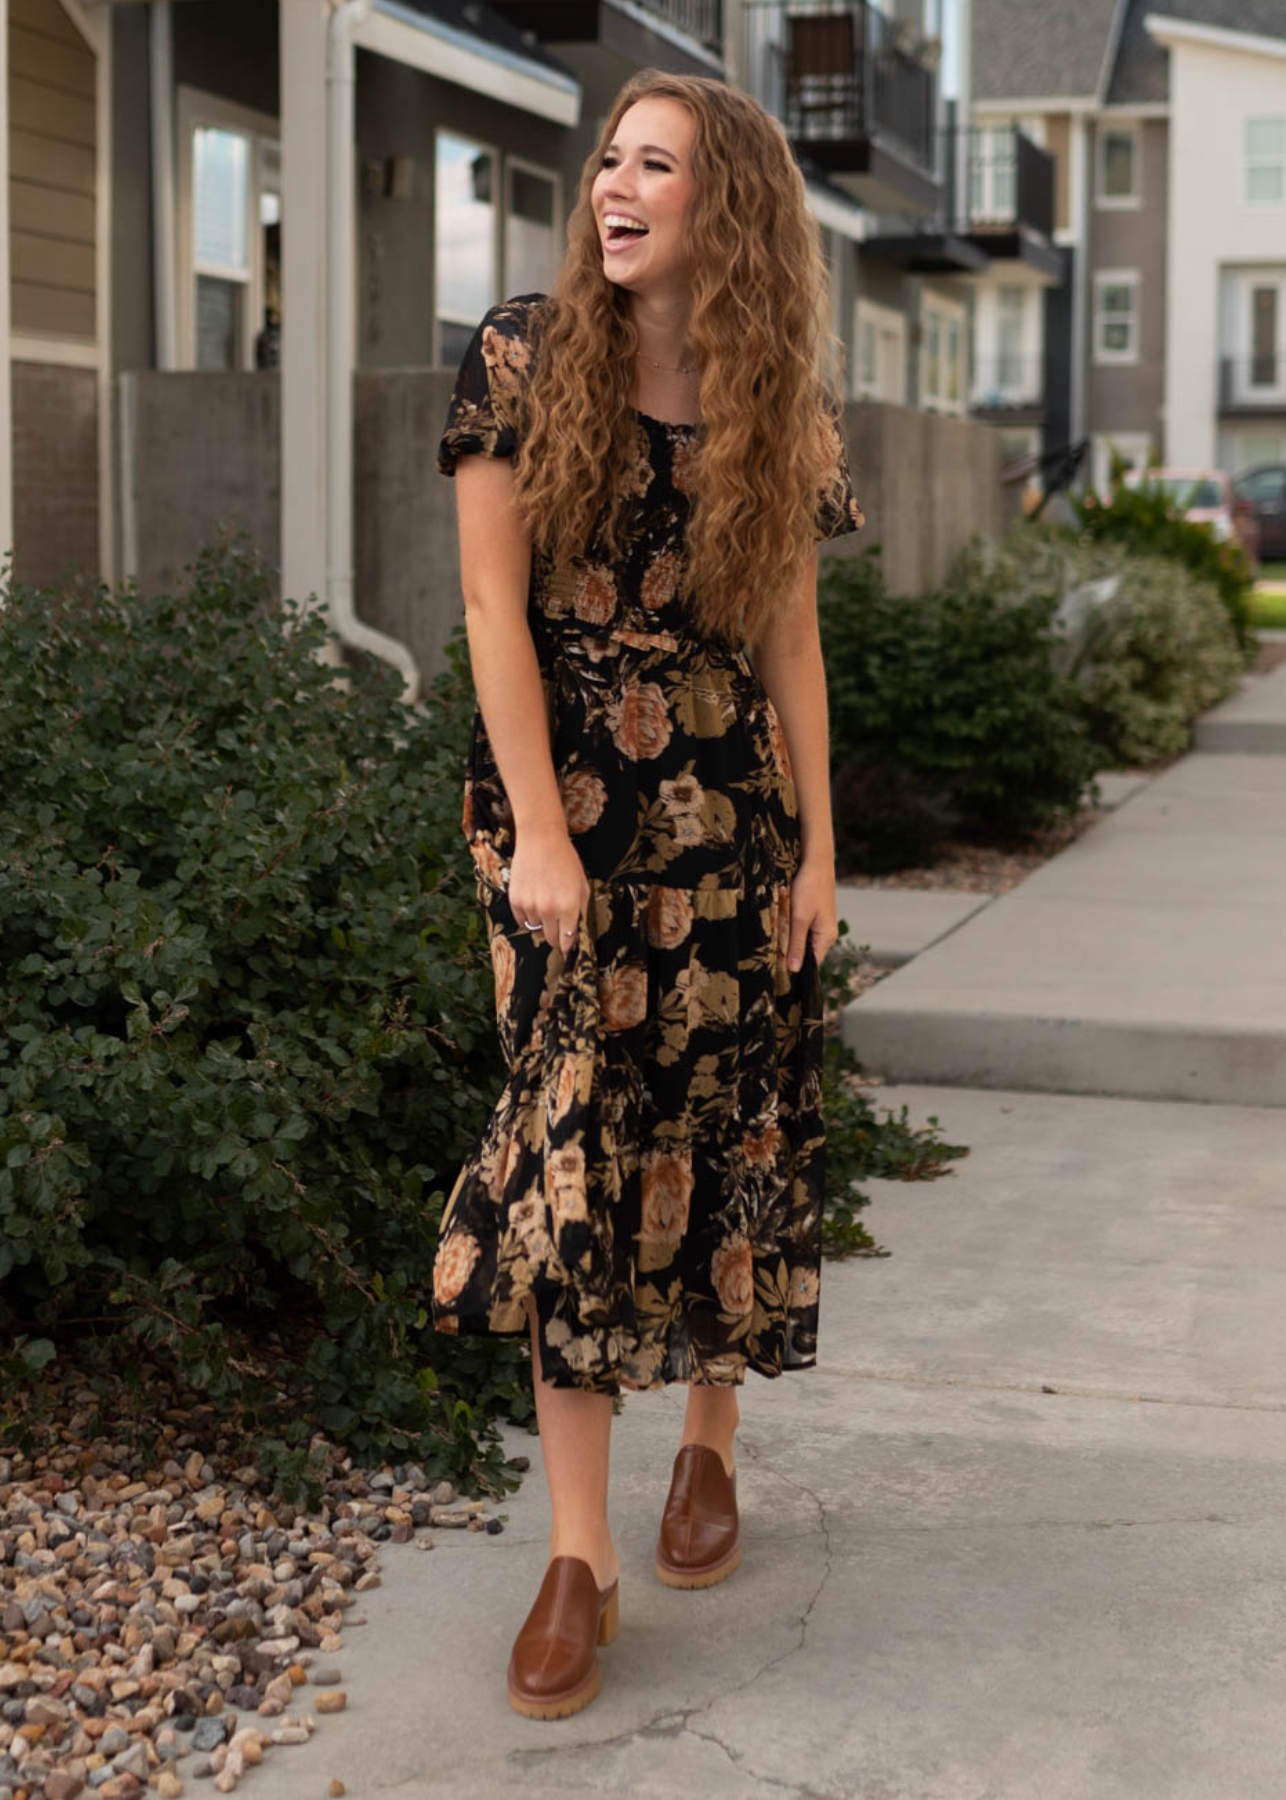 Short sleeve black floral dress with tiered skirt